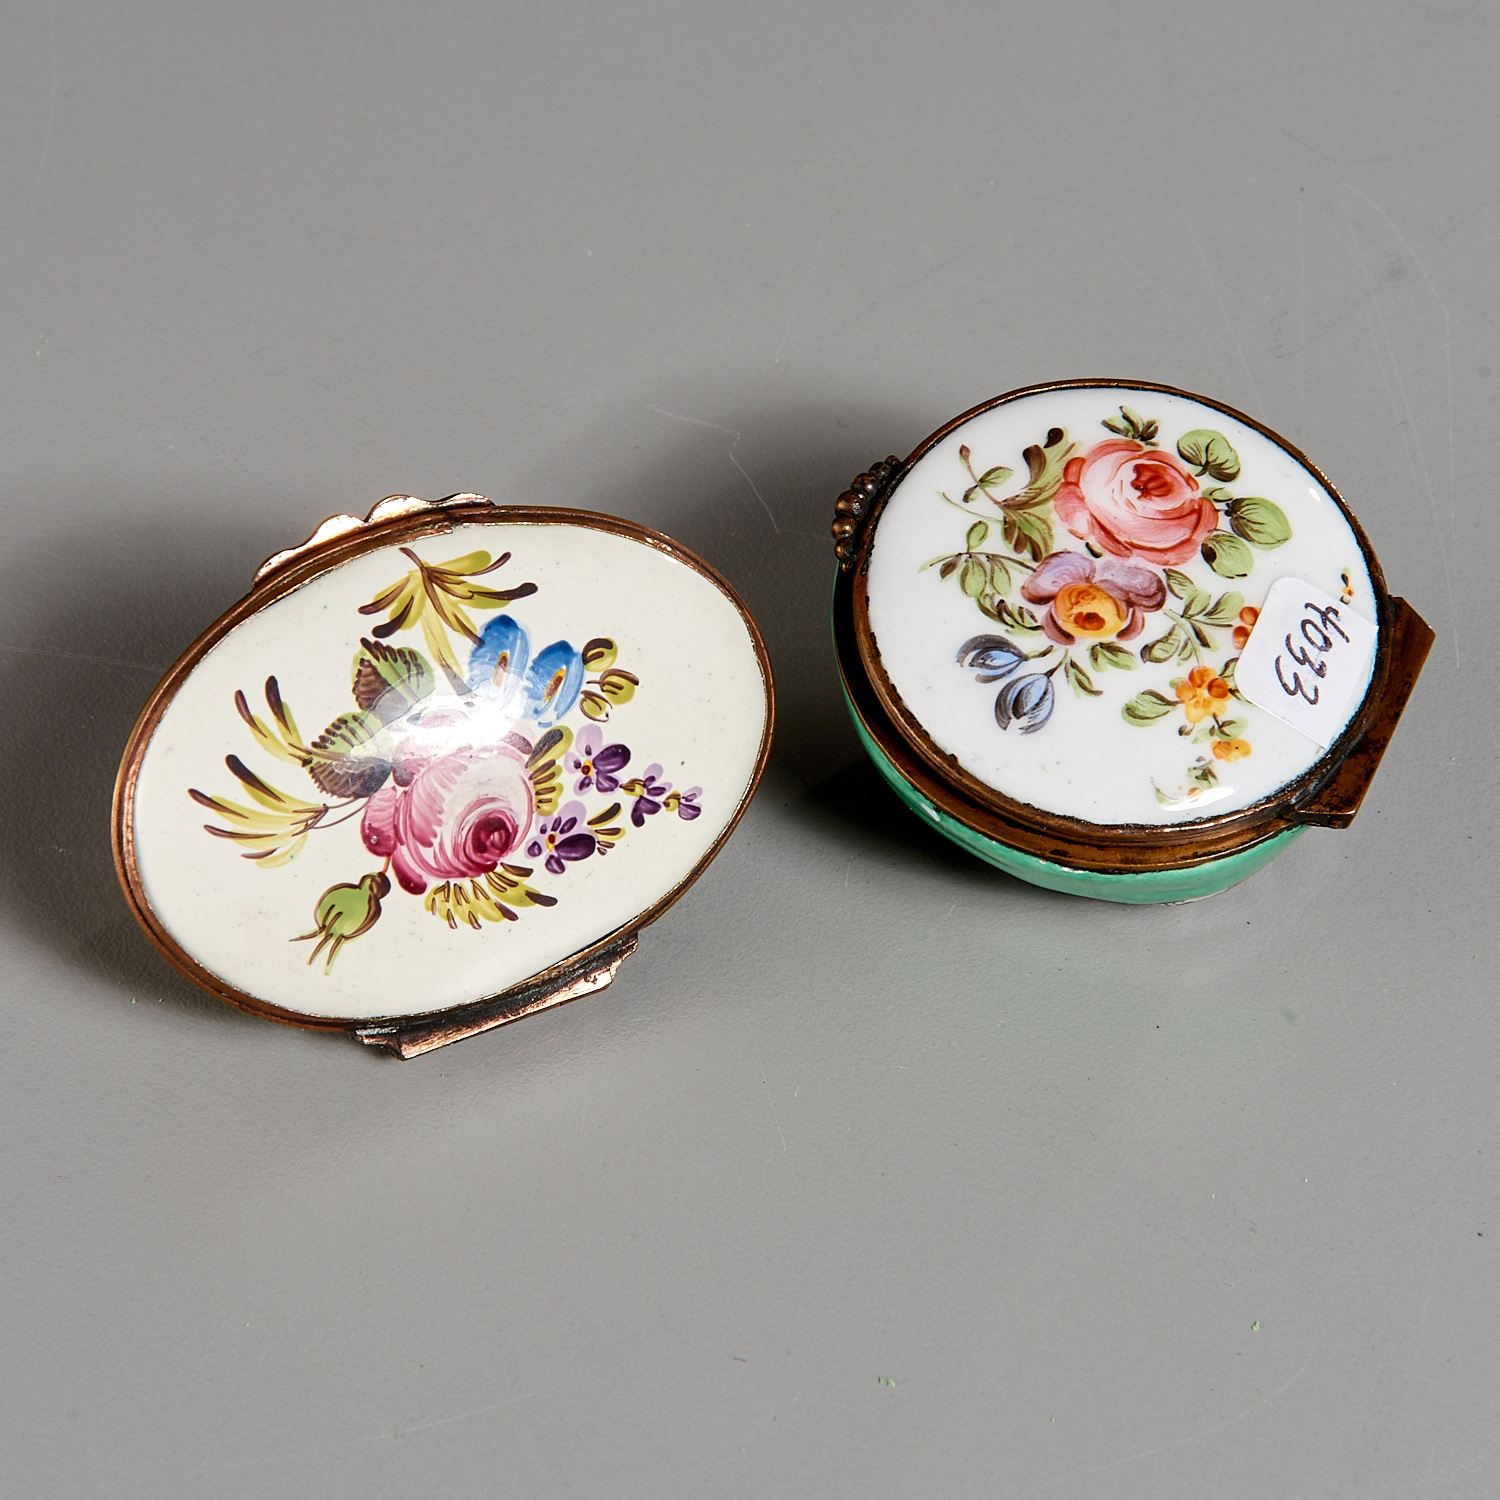 (2) Staffordshire & Battersea Enamel Snuff Boxes - Image 4 of 4